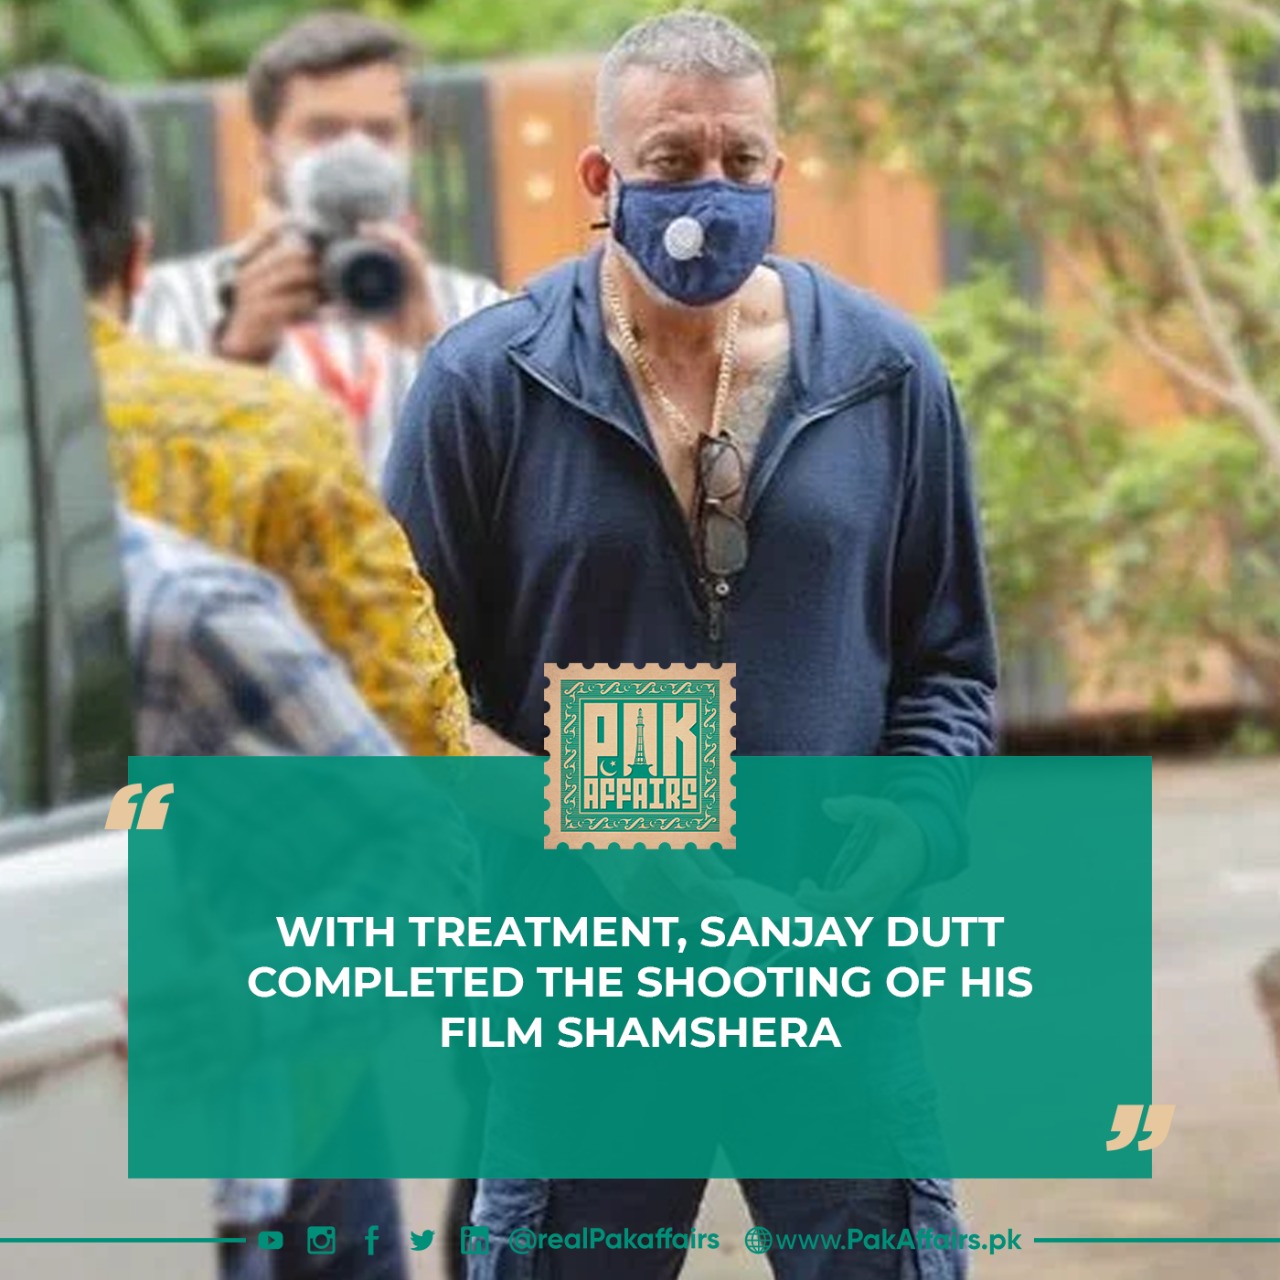 With treatment, Sanjay Dutt completed the shooting of his film Shamshera.